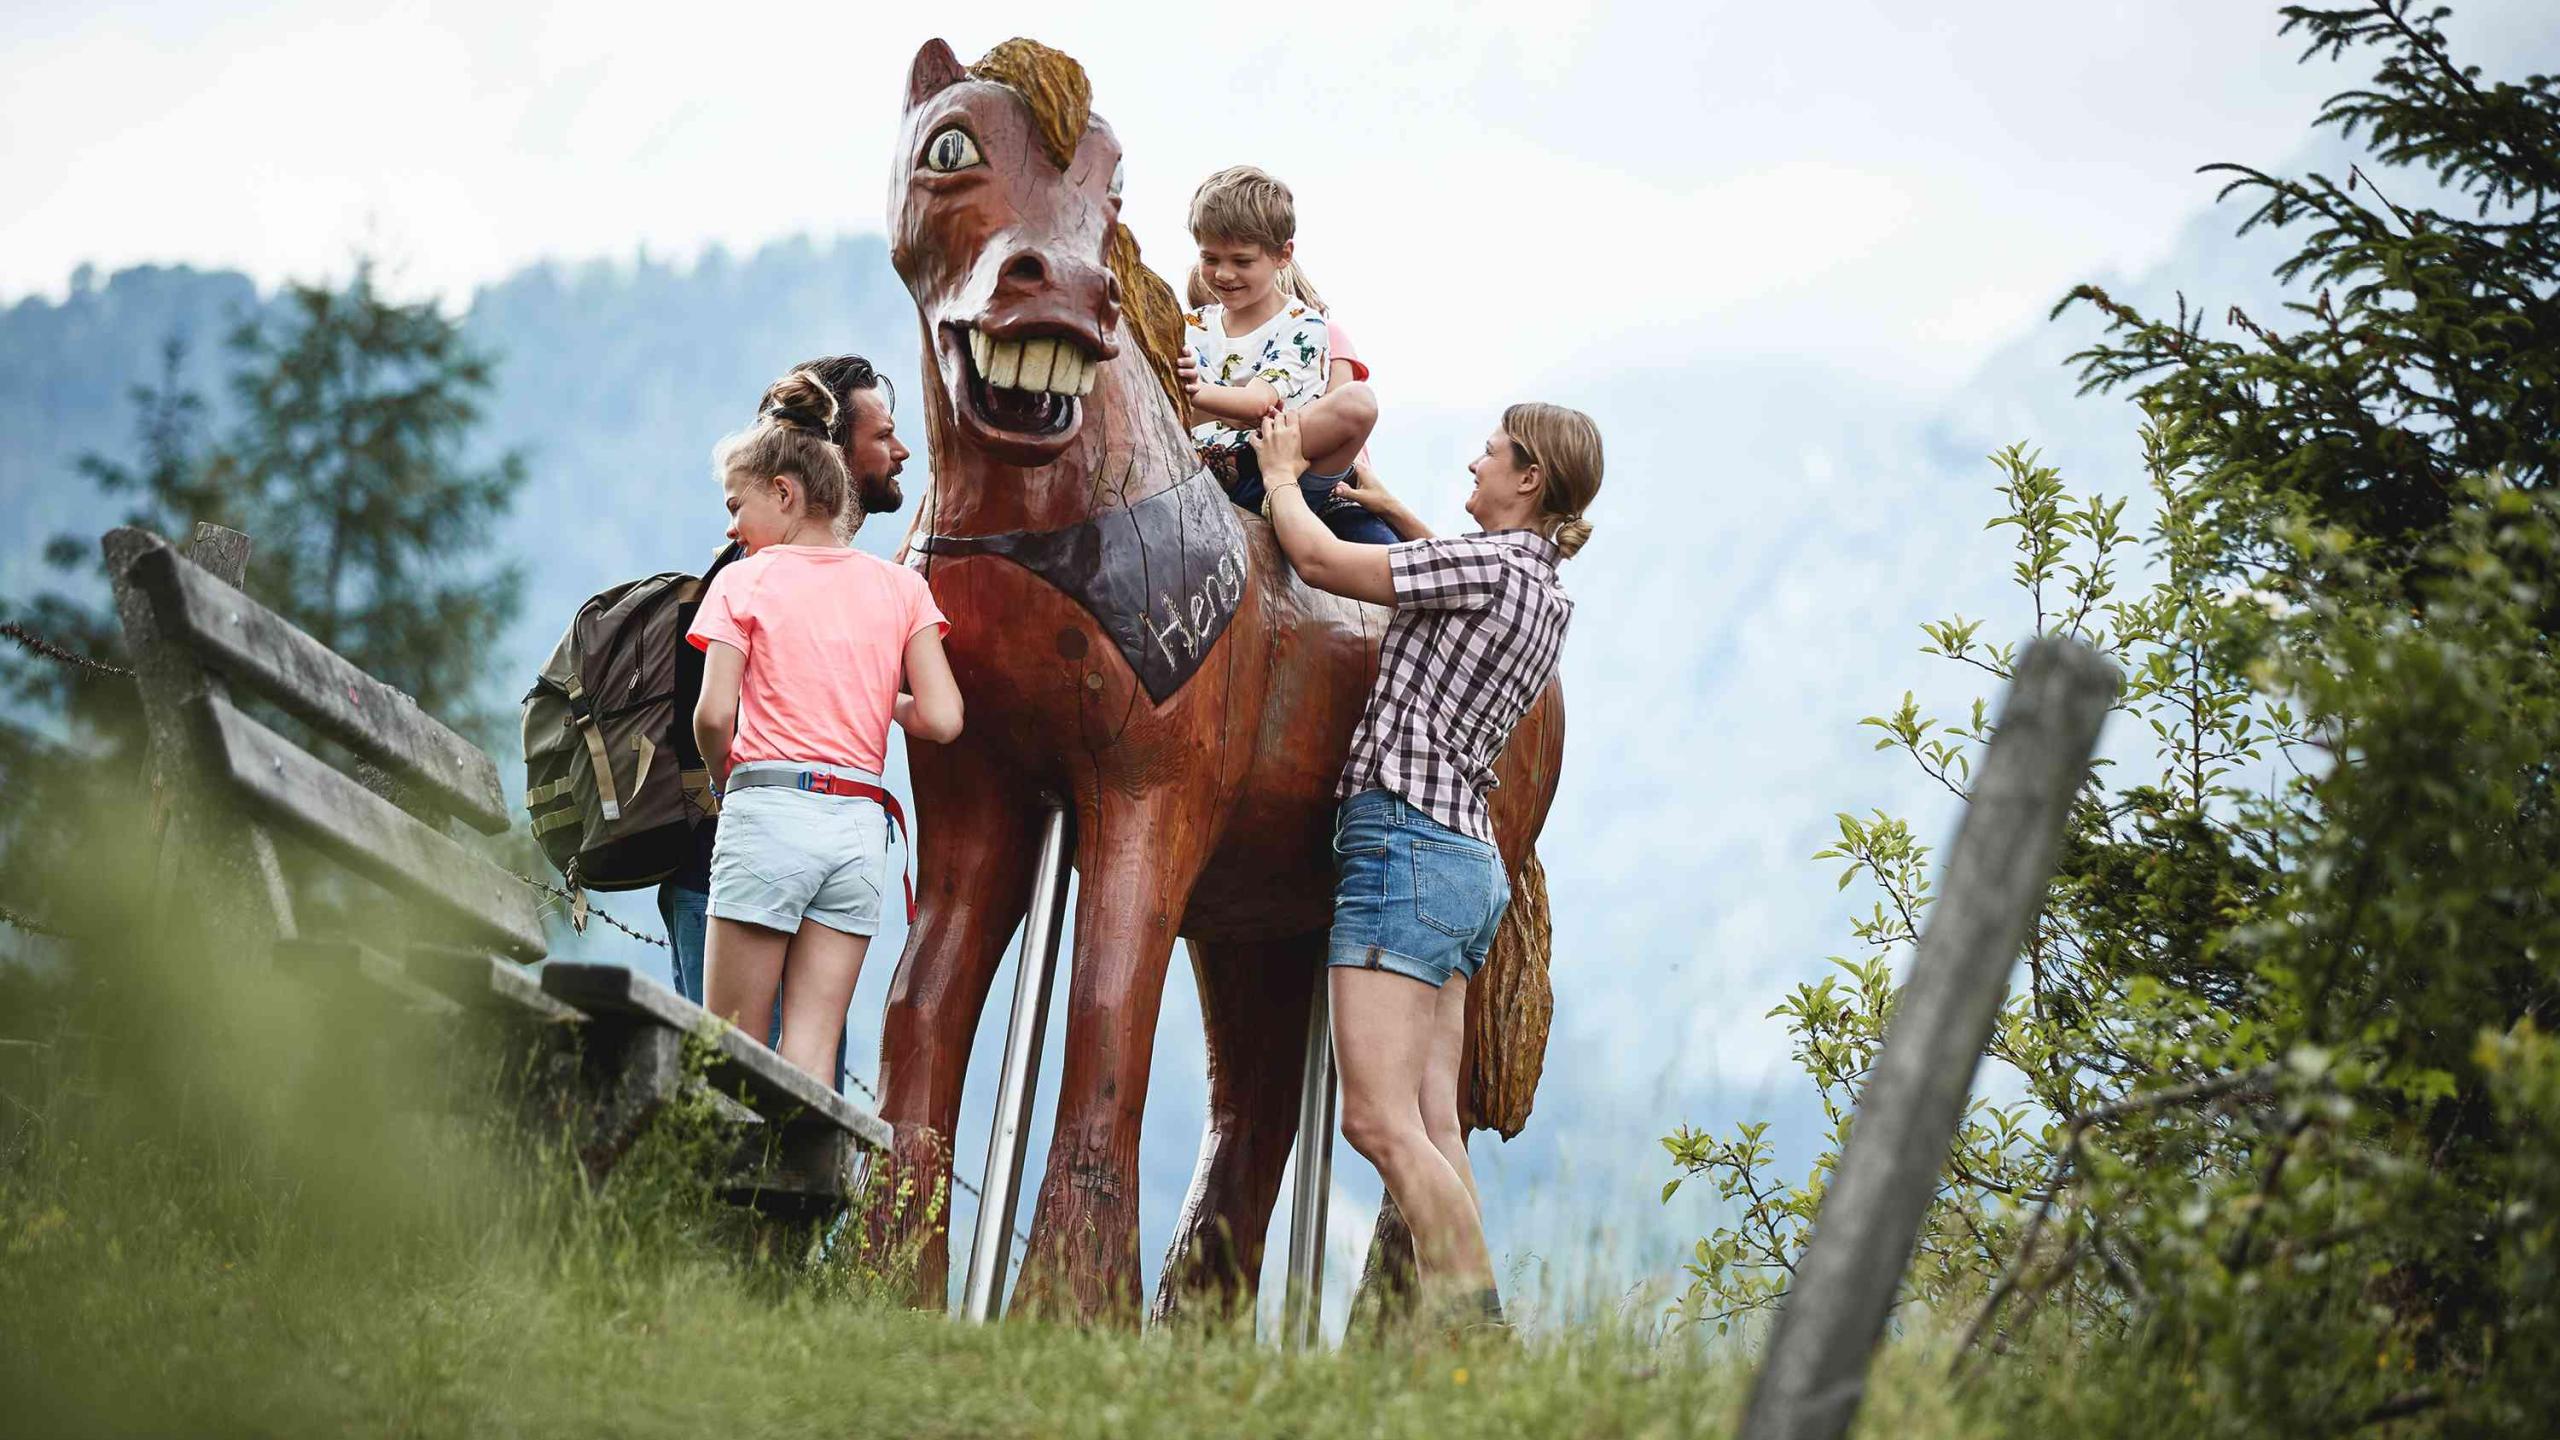 A child sits on a life-size wooden horse surrounded by his family